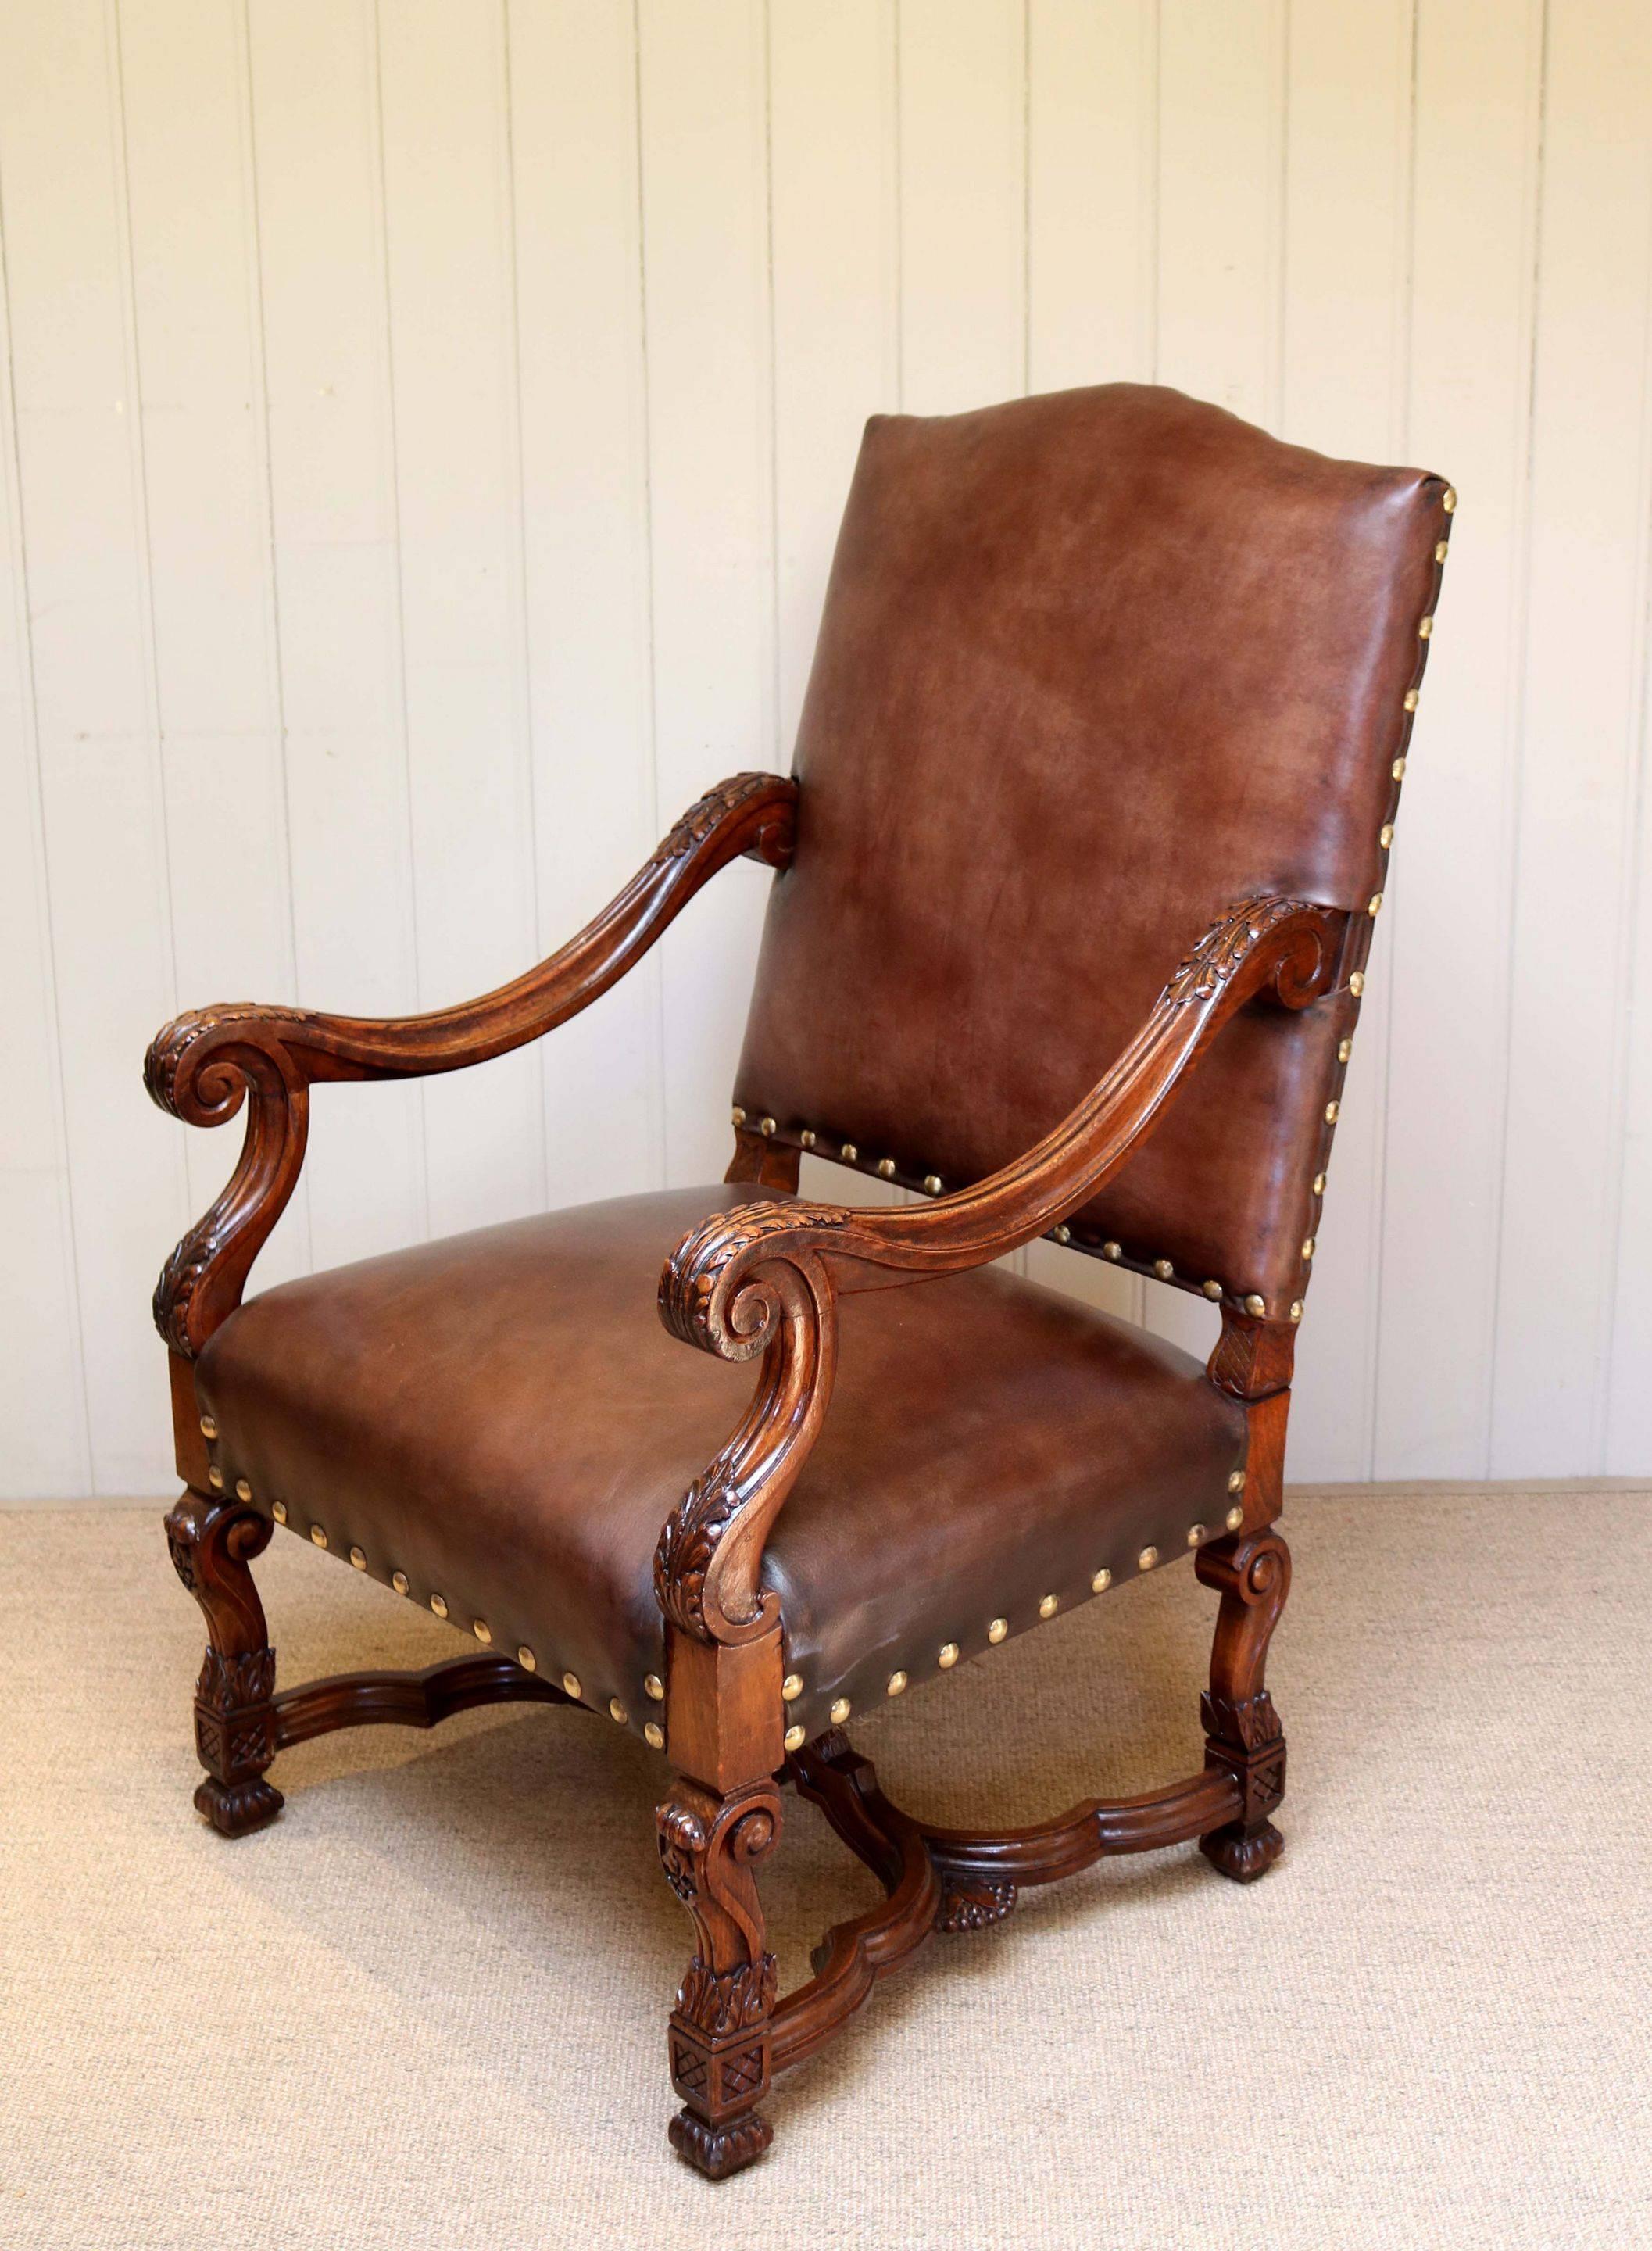 Substantial French beechwood open armchair having a turned wooden frame with carved arm supports and reupholstered in a high grade leather on the seat and back.